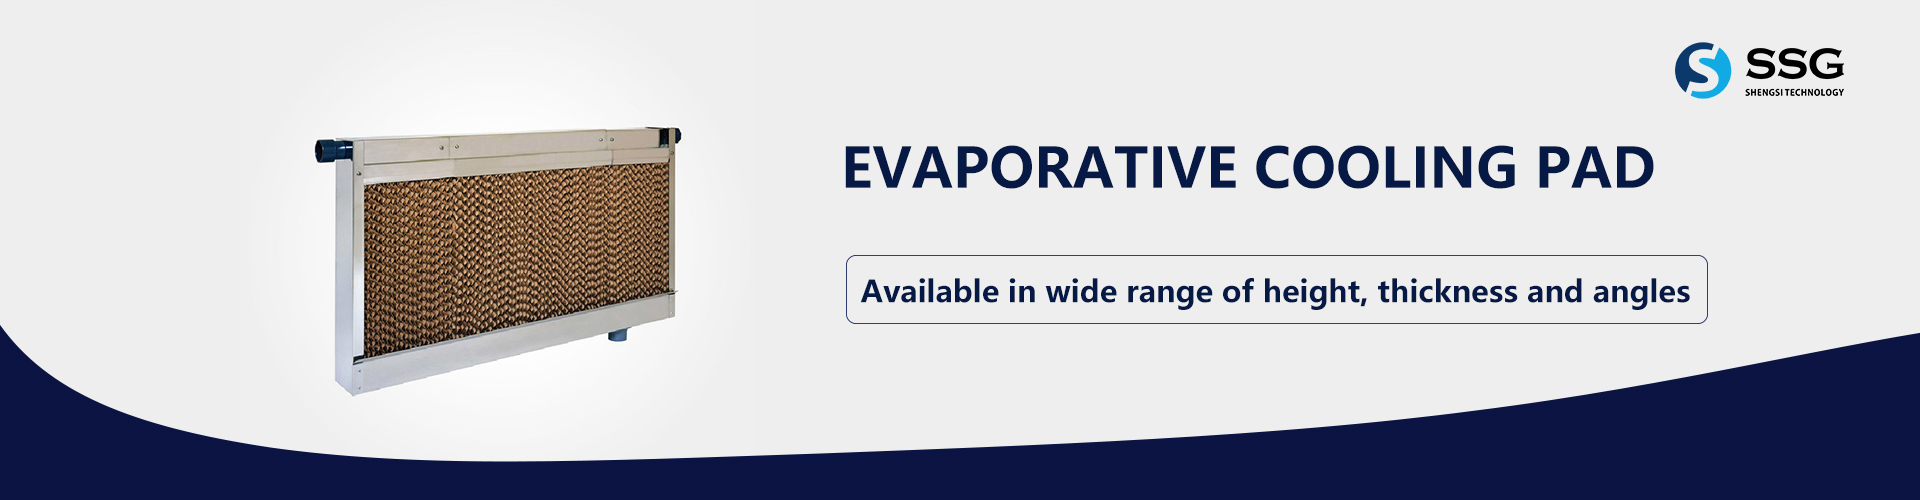 EVAPORATIVE-COOLING-PAD-banner